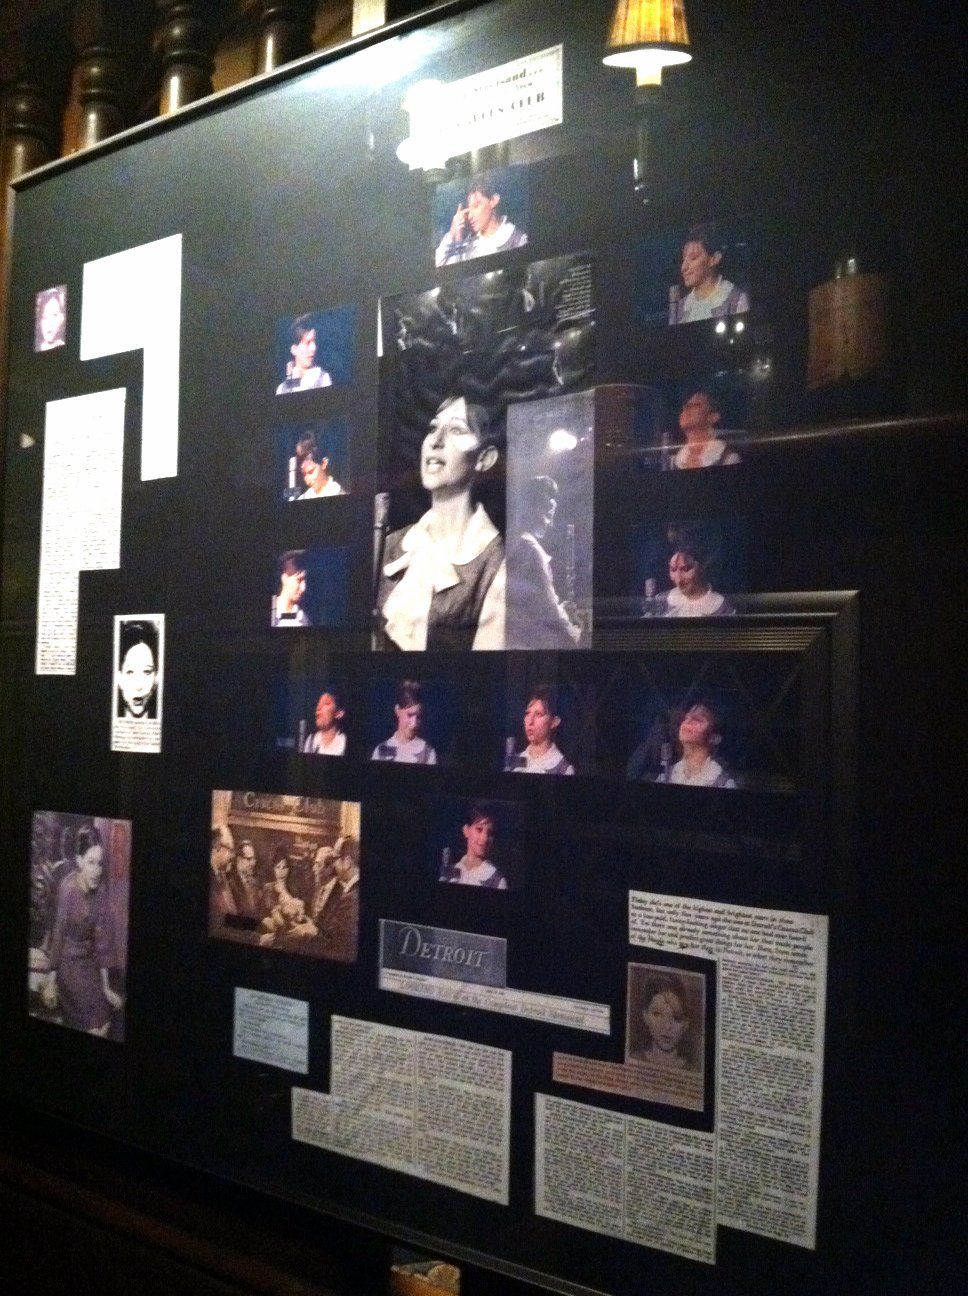 The Streisand tribute wall in the Caucus Club, 2012.